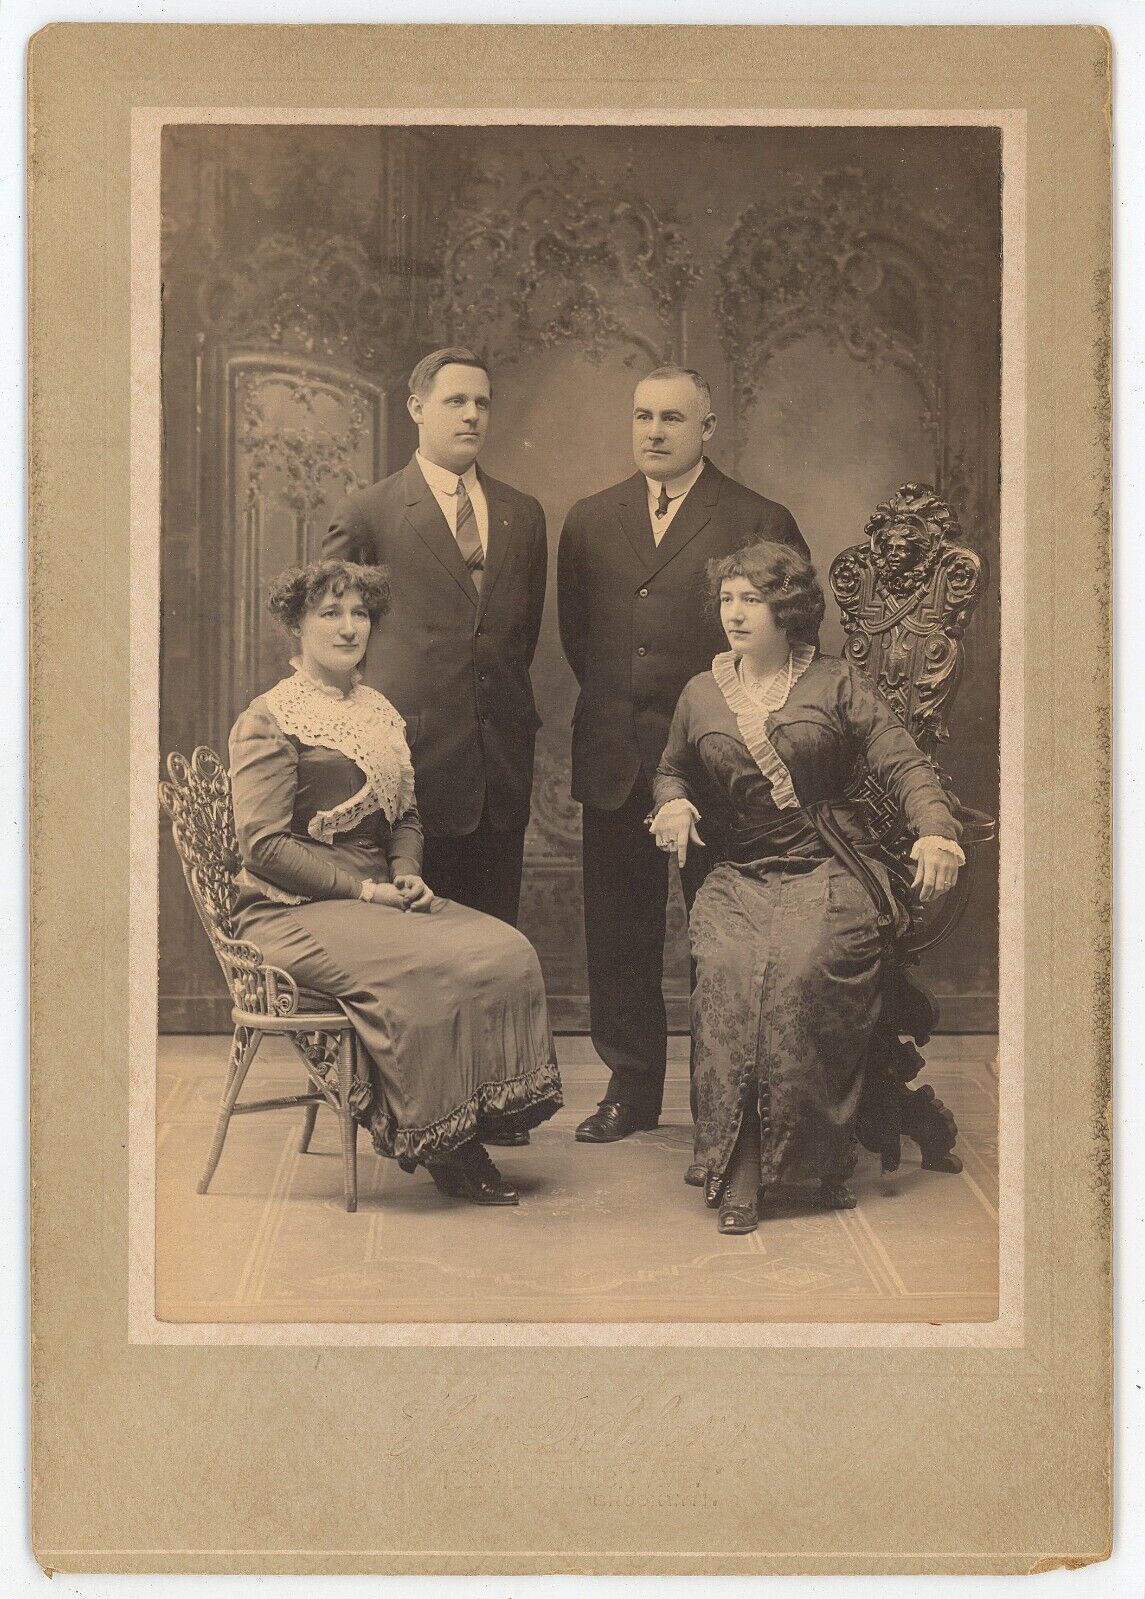 Antique c1900s Cabinet Card 2 Lovely Couples Women Sitting in Chairs Brooklyn NY